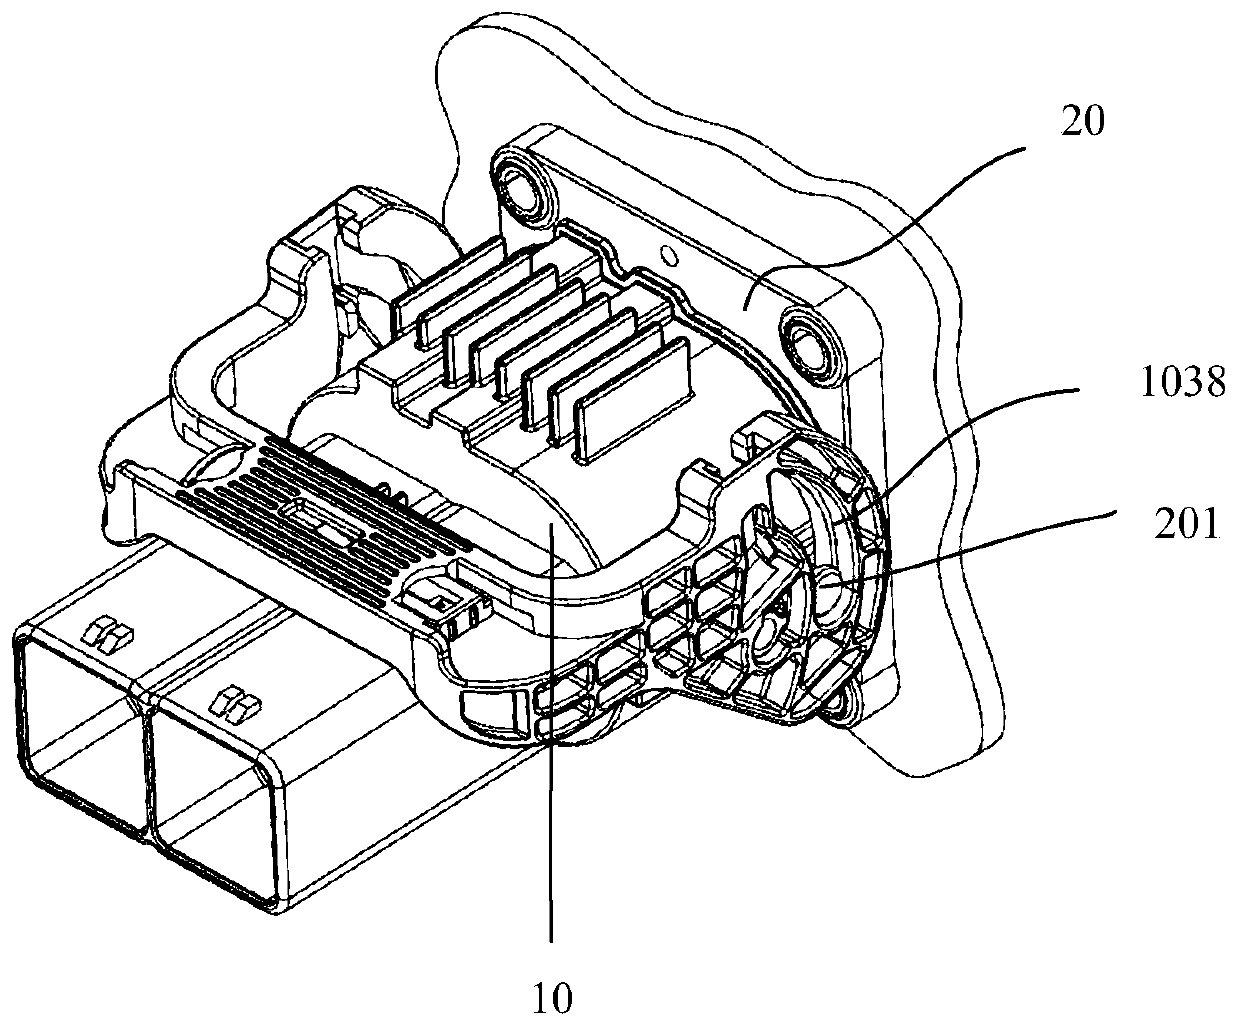 Electrical connector with position holder